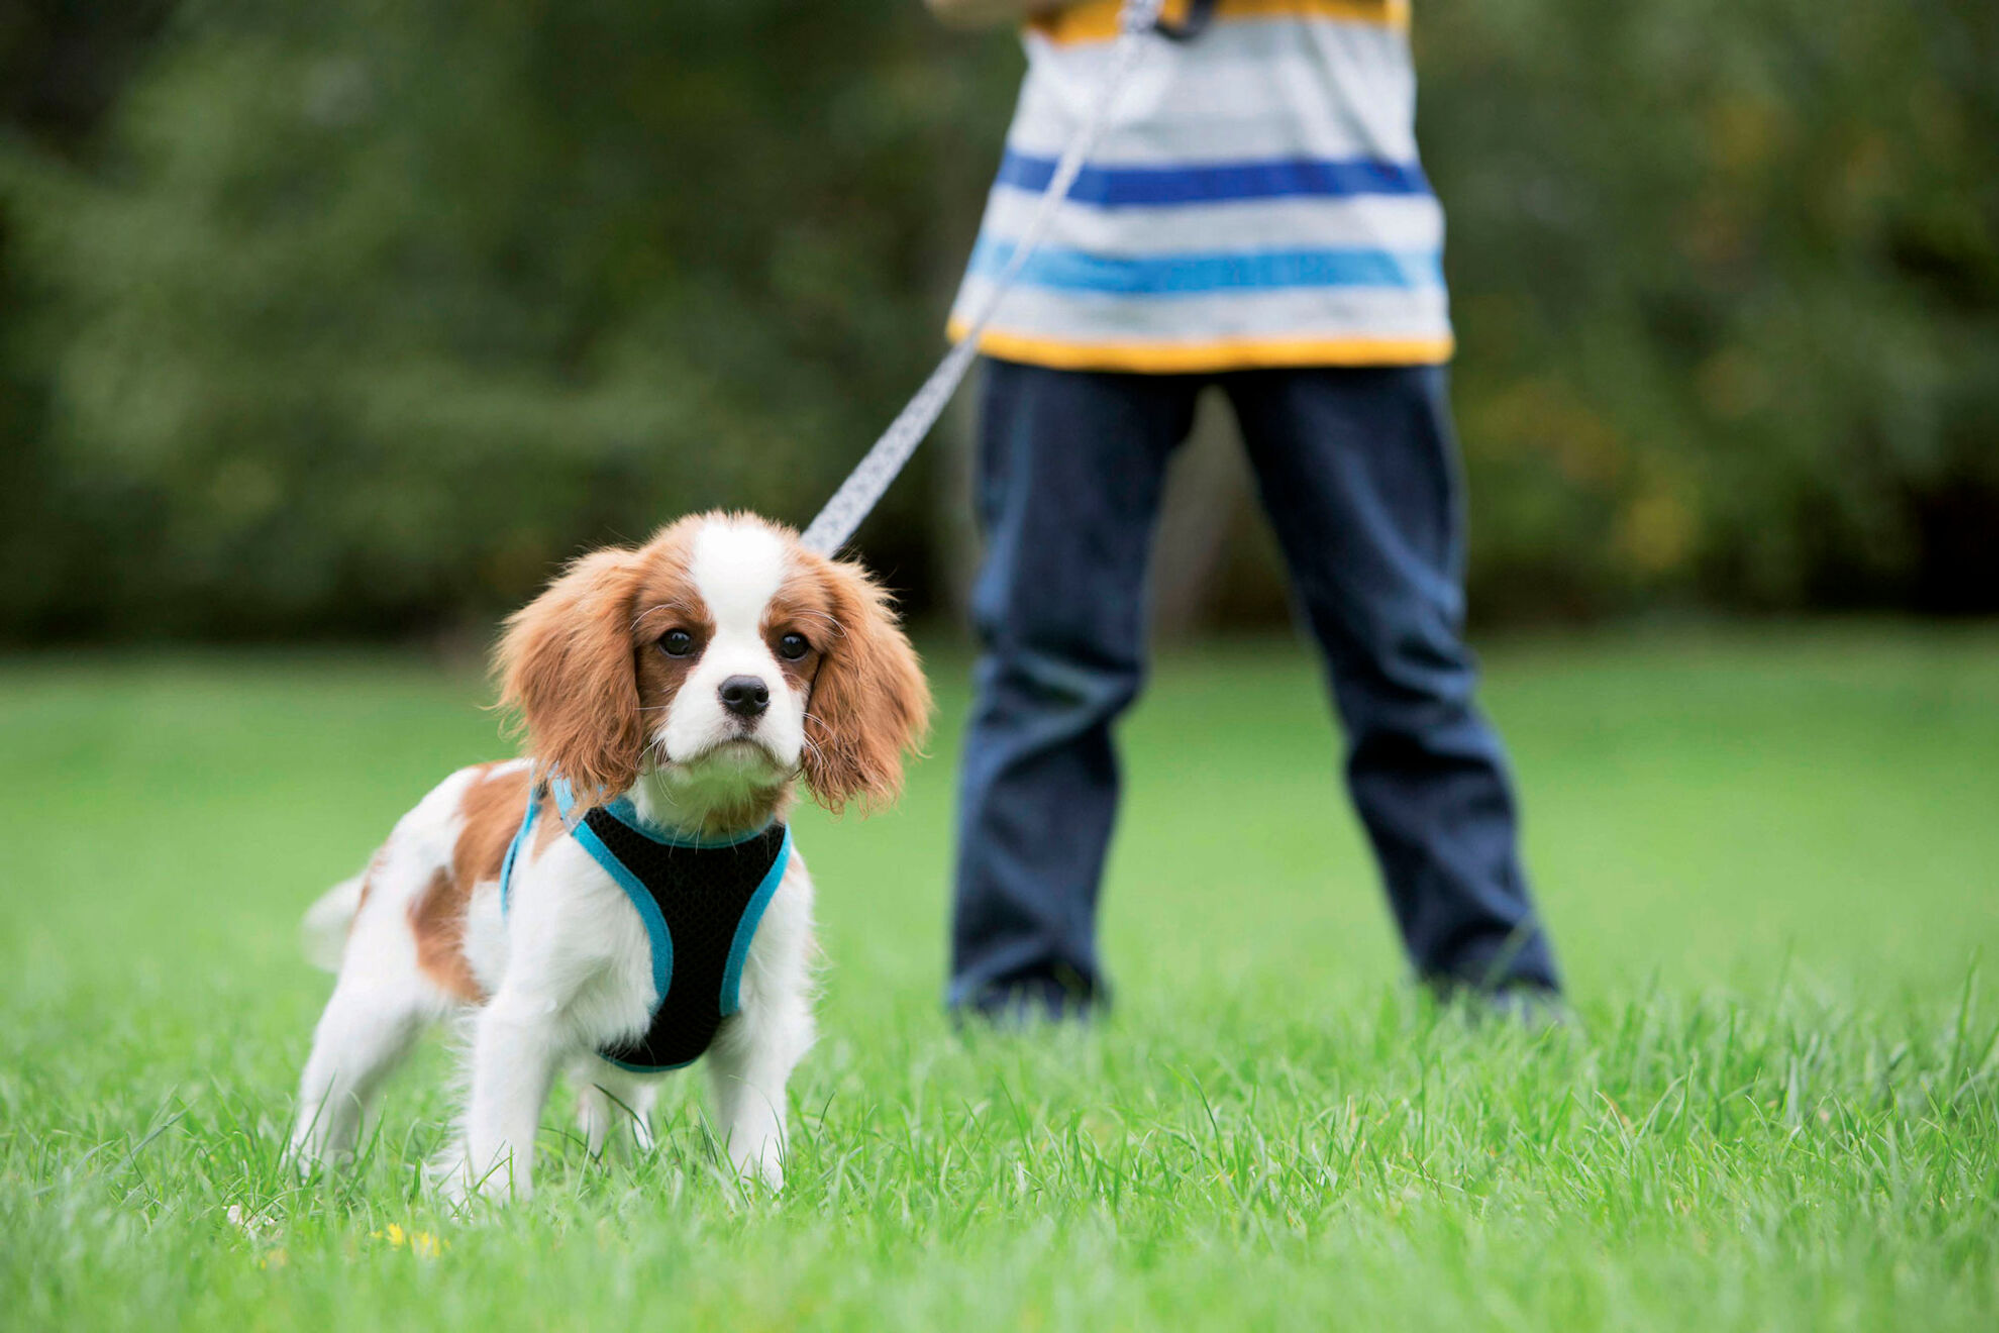 The first few outdoor walks for a young puppy can be a daunting experience